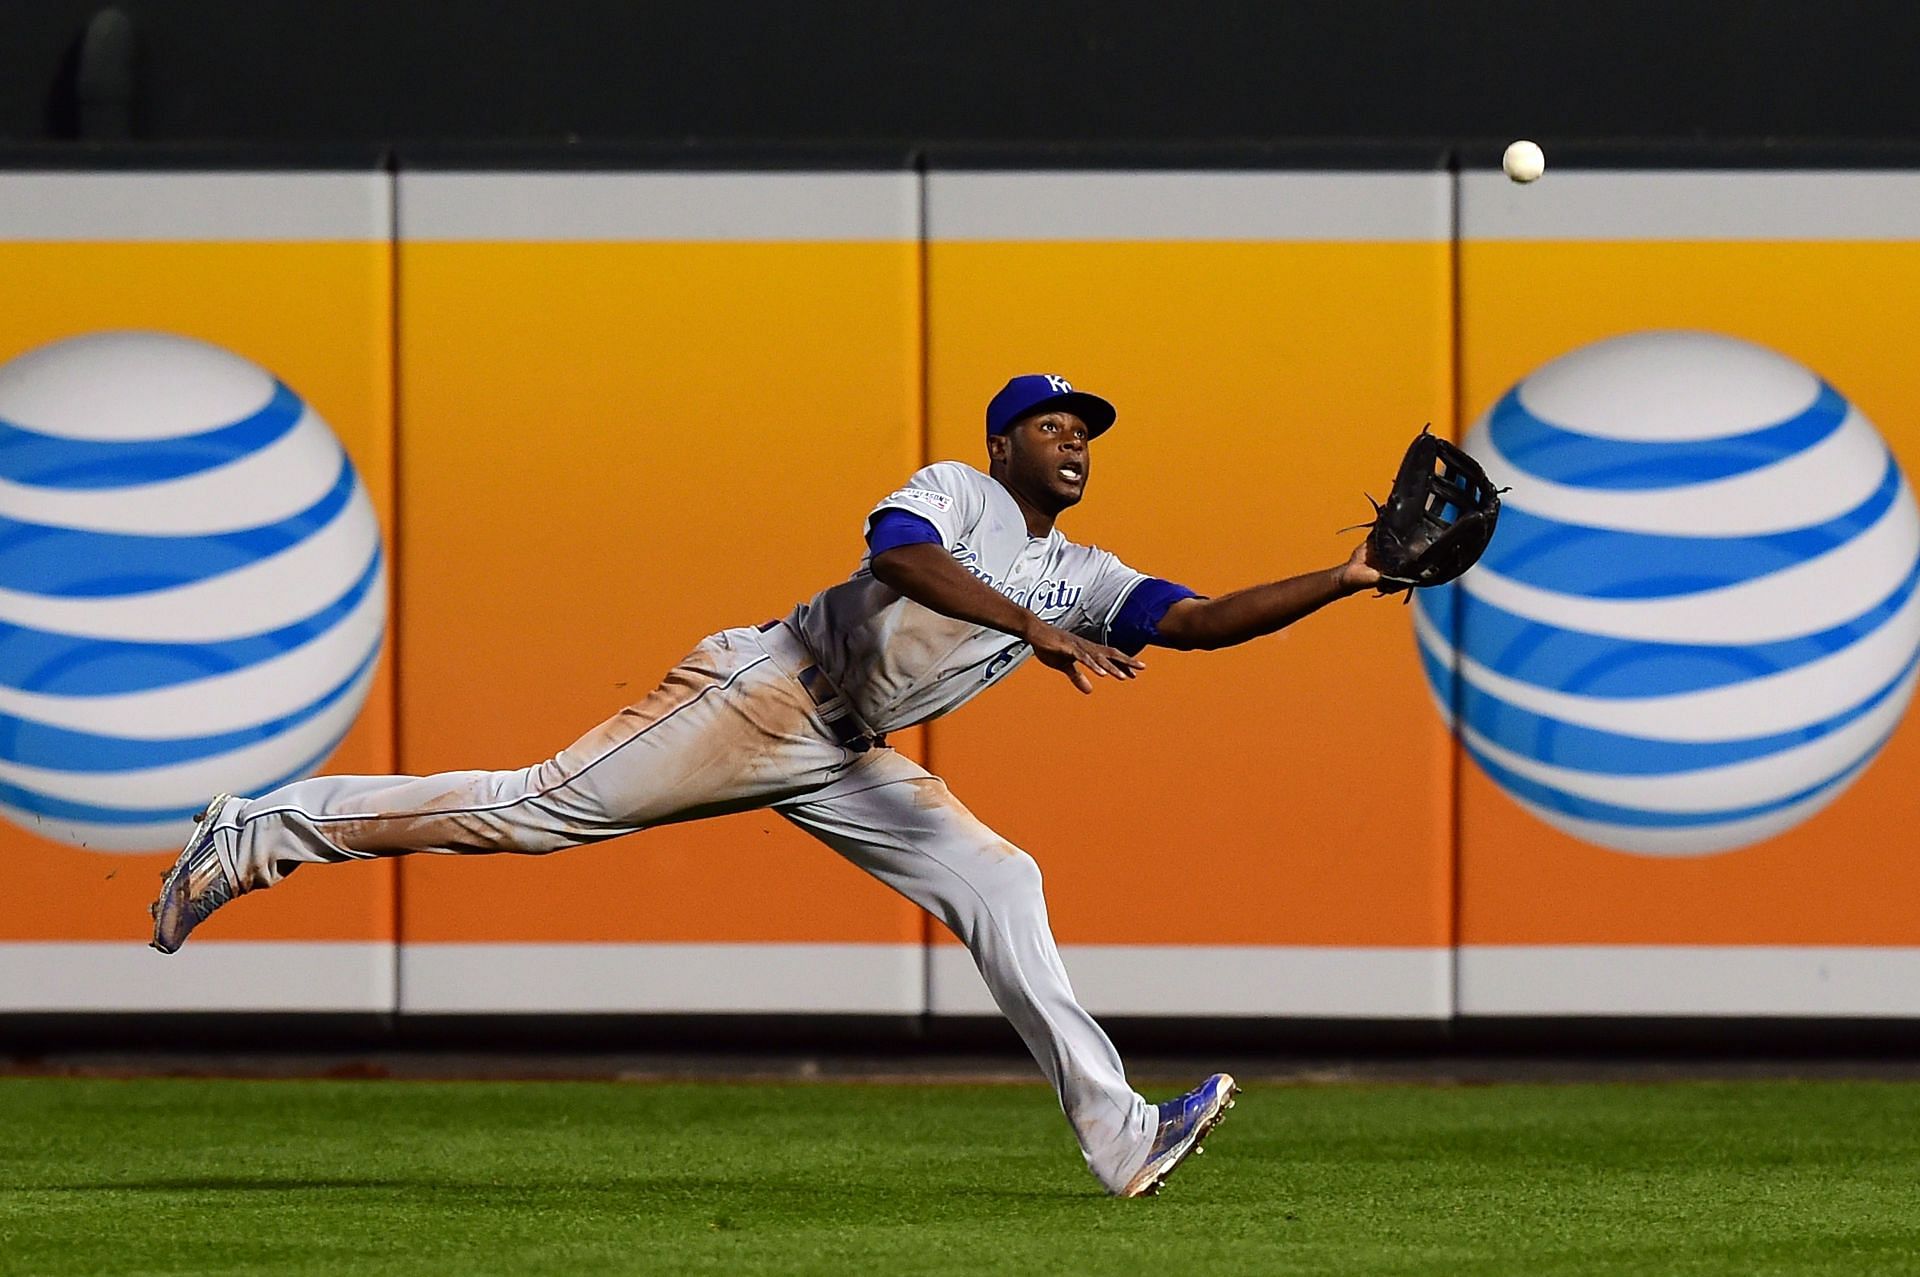 Lorenzo Cain relishes reaching 10 years MLB service but future unclear